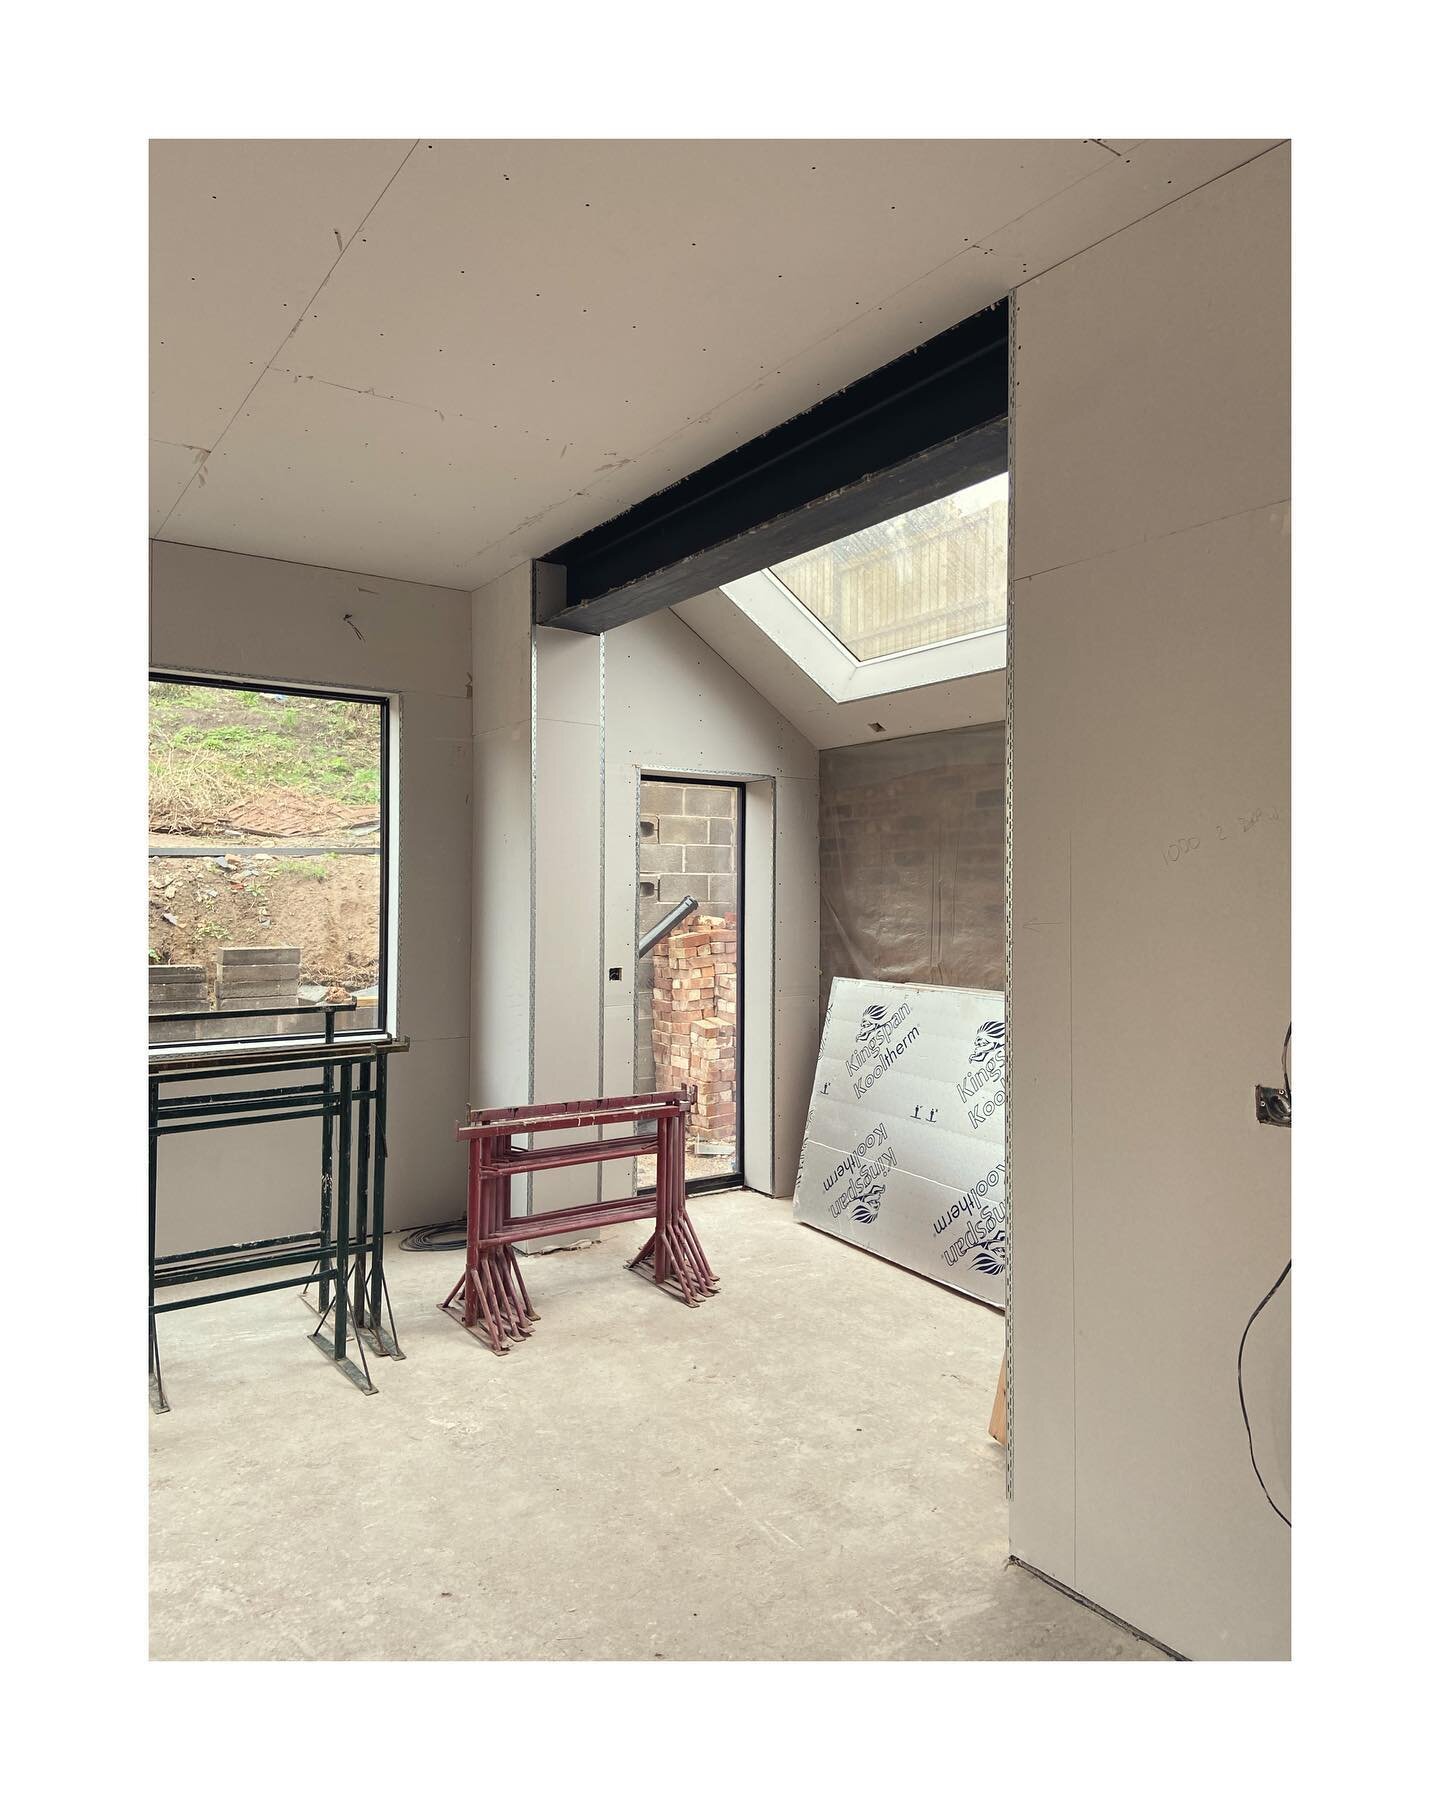 Split House // BLD_125

We&rsquo;re drawn to this space every time we visit site due to the scale and quality of natural light. The snug benefits from direct views into the garden with huge areas of glazing and a rustic feature brick wall. 

Keep an 